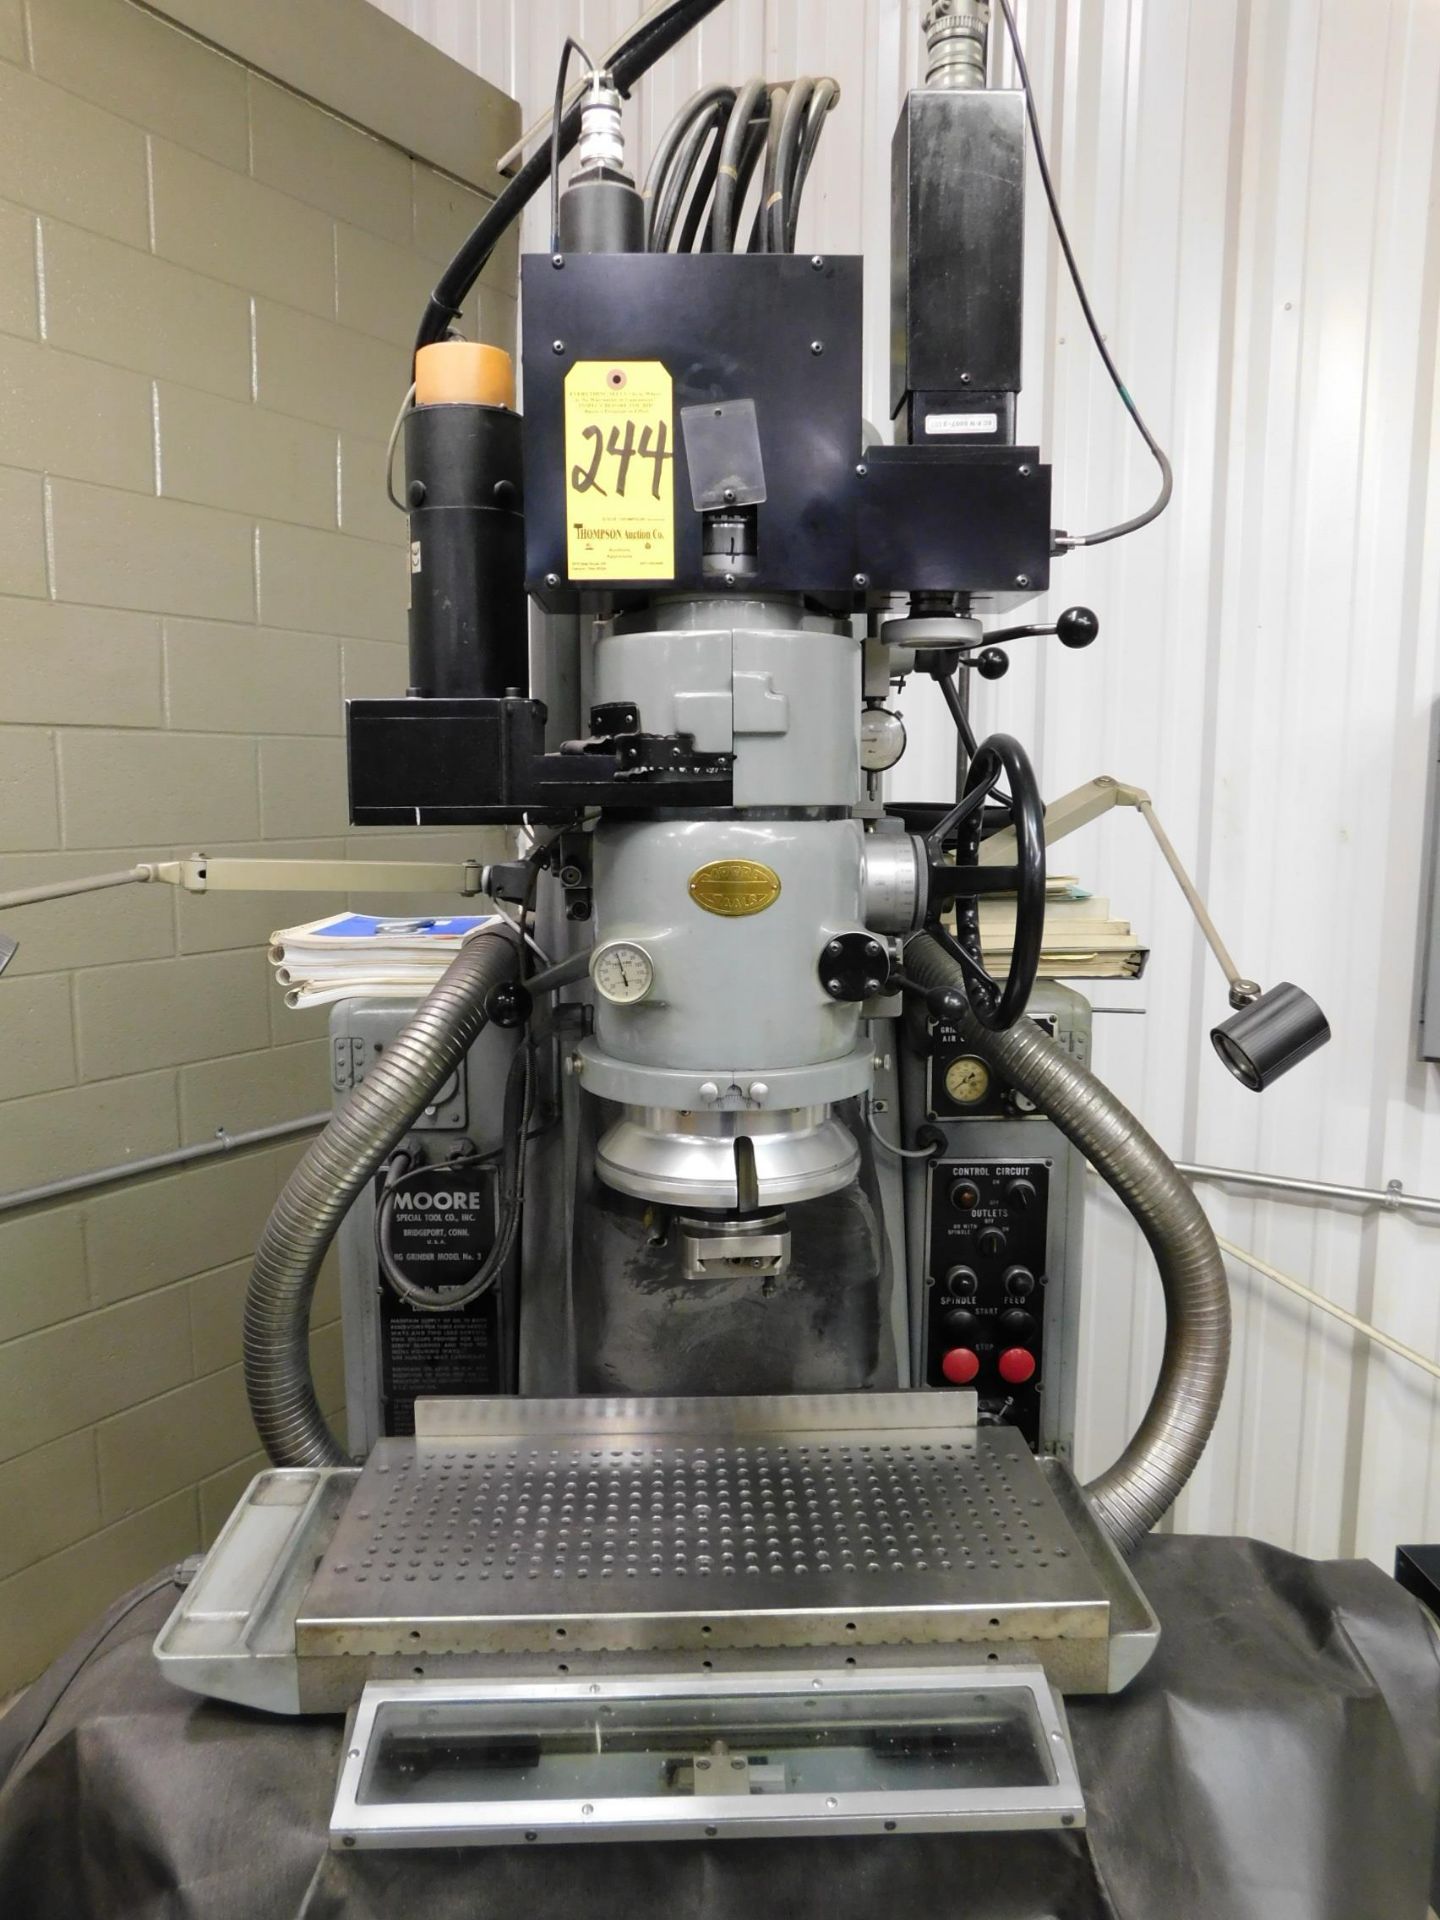 Moore Model #3 CNC Jig Grinder snG163w/NASA/Fagor Model AGS-3 CNC Control (NOT IN SERVICE) - Image 3 of 13